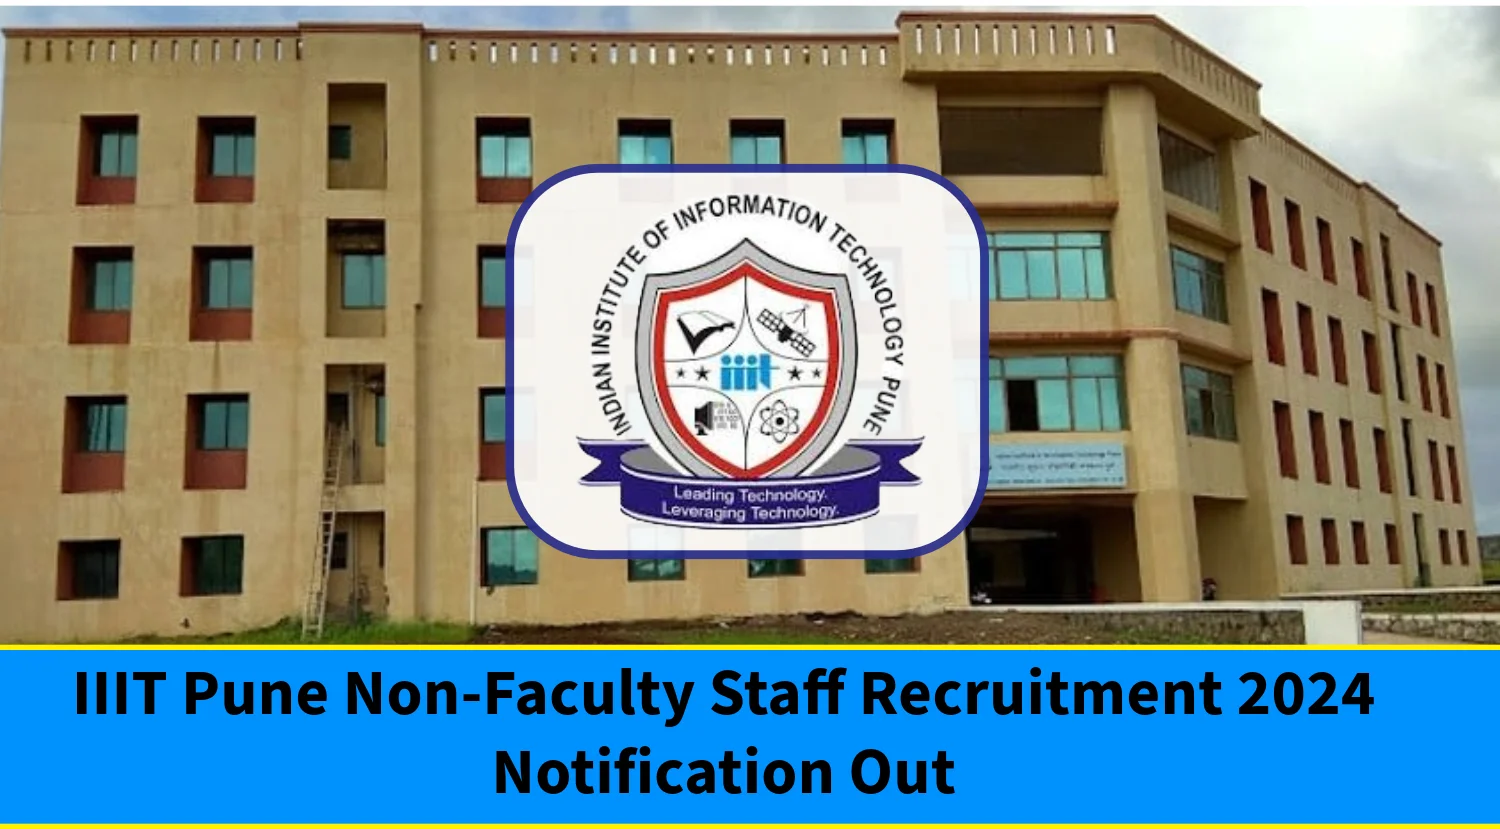 IIIT Pune Non-Faculty Staff Recruitment 2024 Notification Out